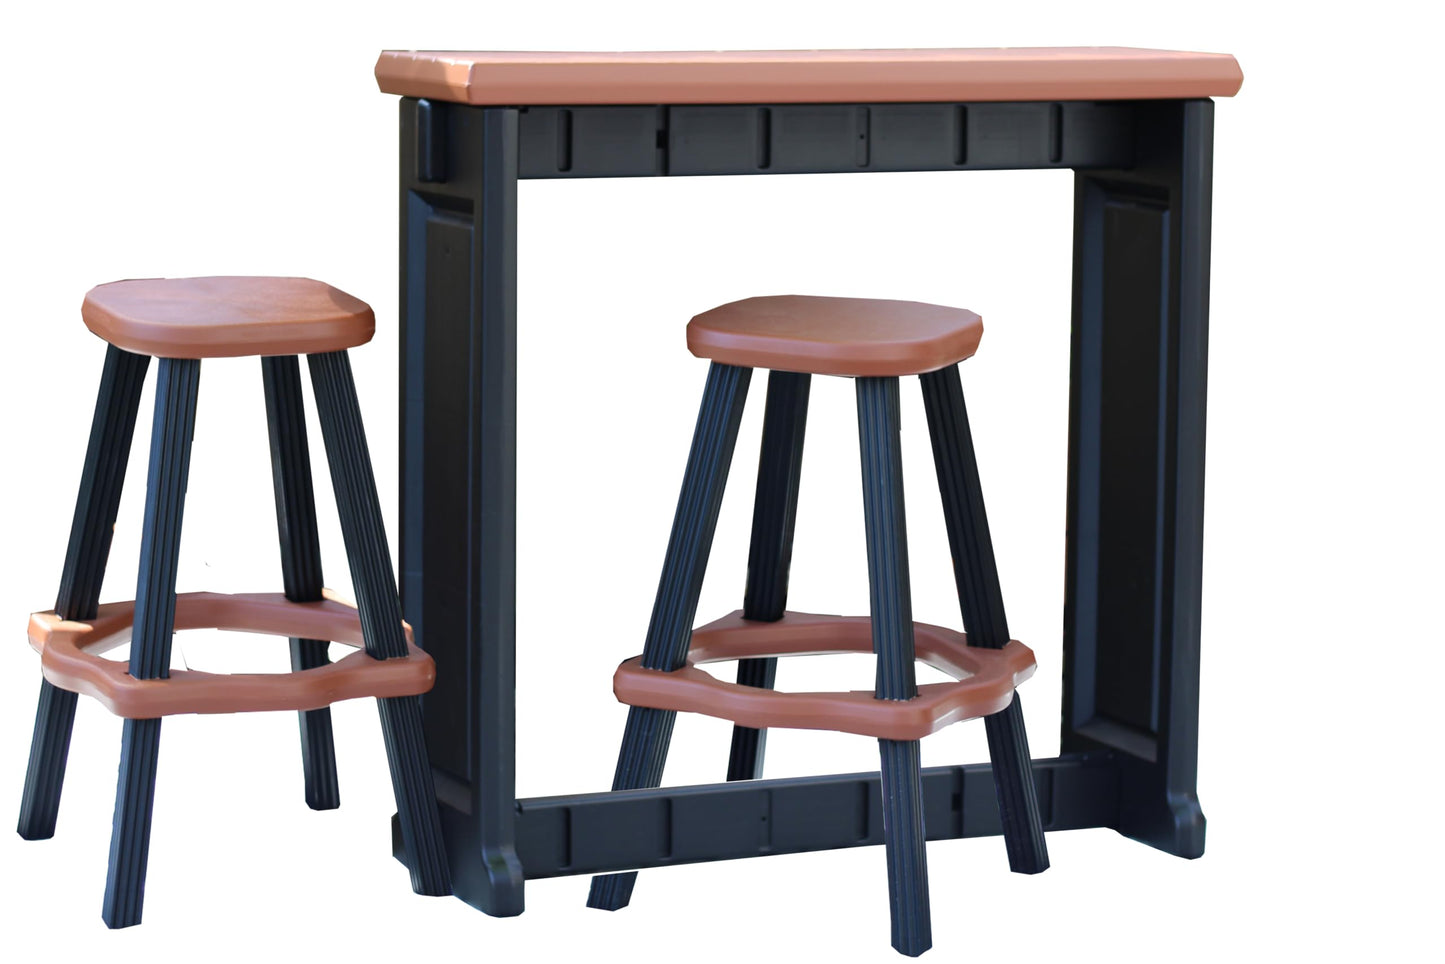 Leisure Accents Single Bar Set Includes 2 Barstools Redwood Top & Black Base Ideal for Patio Hot Tub Area Backyard Durable WeatherResistant Design Easy Nohardware Assembly Proudly Made in USA